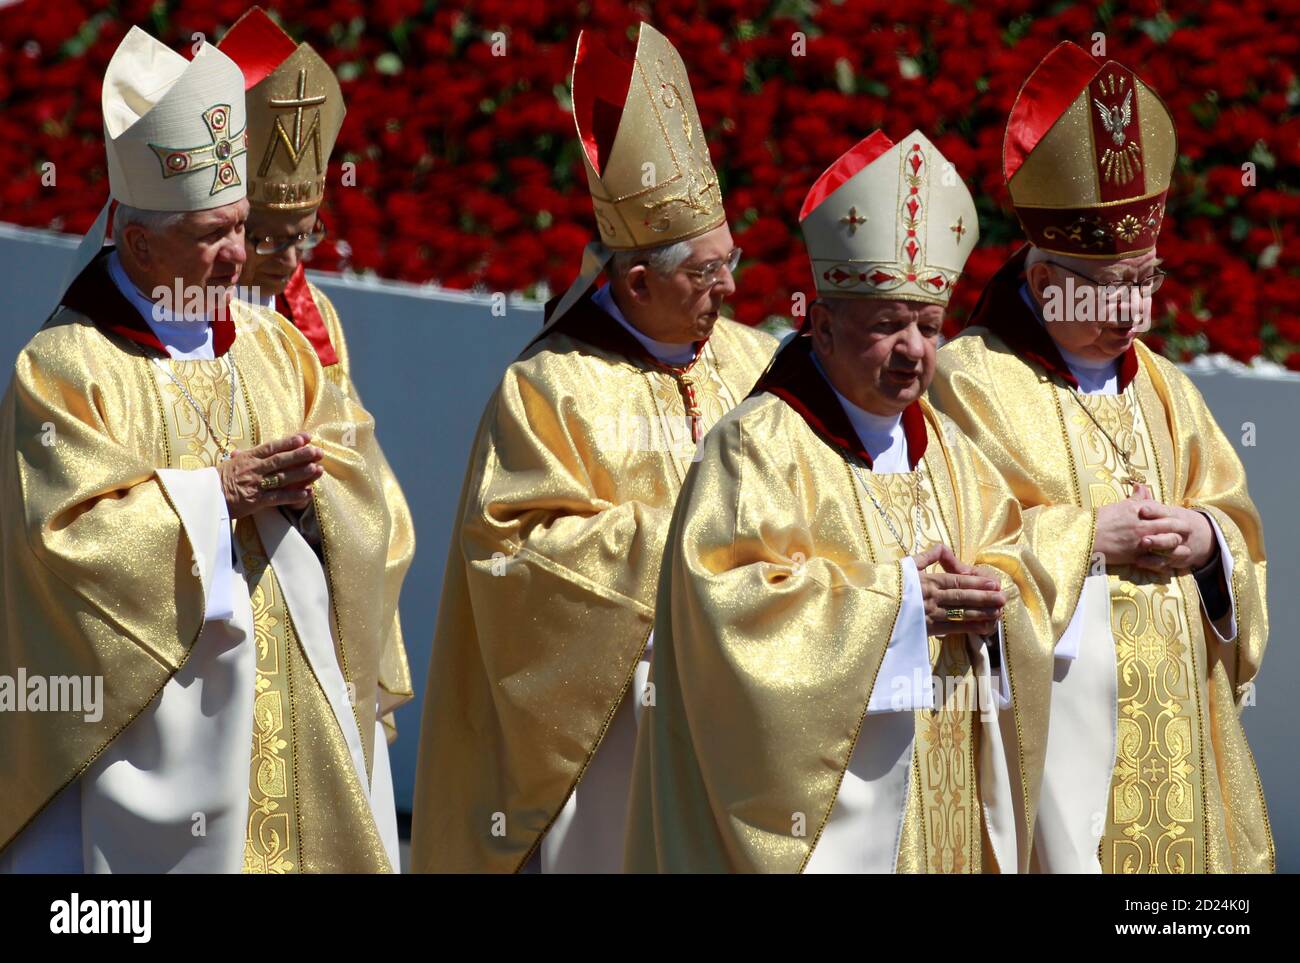 Archbishop Stanislaw Dziwisz (2nd R) and Cardinal Jozef Glemp (3rd R) arrive at beatification mass on Plac Pilsudskiego in center of Warsaw June 6, 2010. Poland's communist-era martyr Father Jerzy Popieluszko moved a step closer to sainthood on Sunday after a beatification mass held in Warsaw by papal delegate Archbishop Angelo Amato.  REUTERS/Peter Andrews (POLAND - Tags: RELIGION) Stock Photo